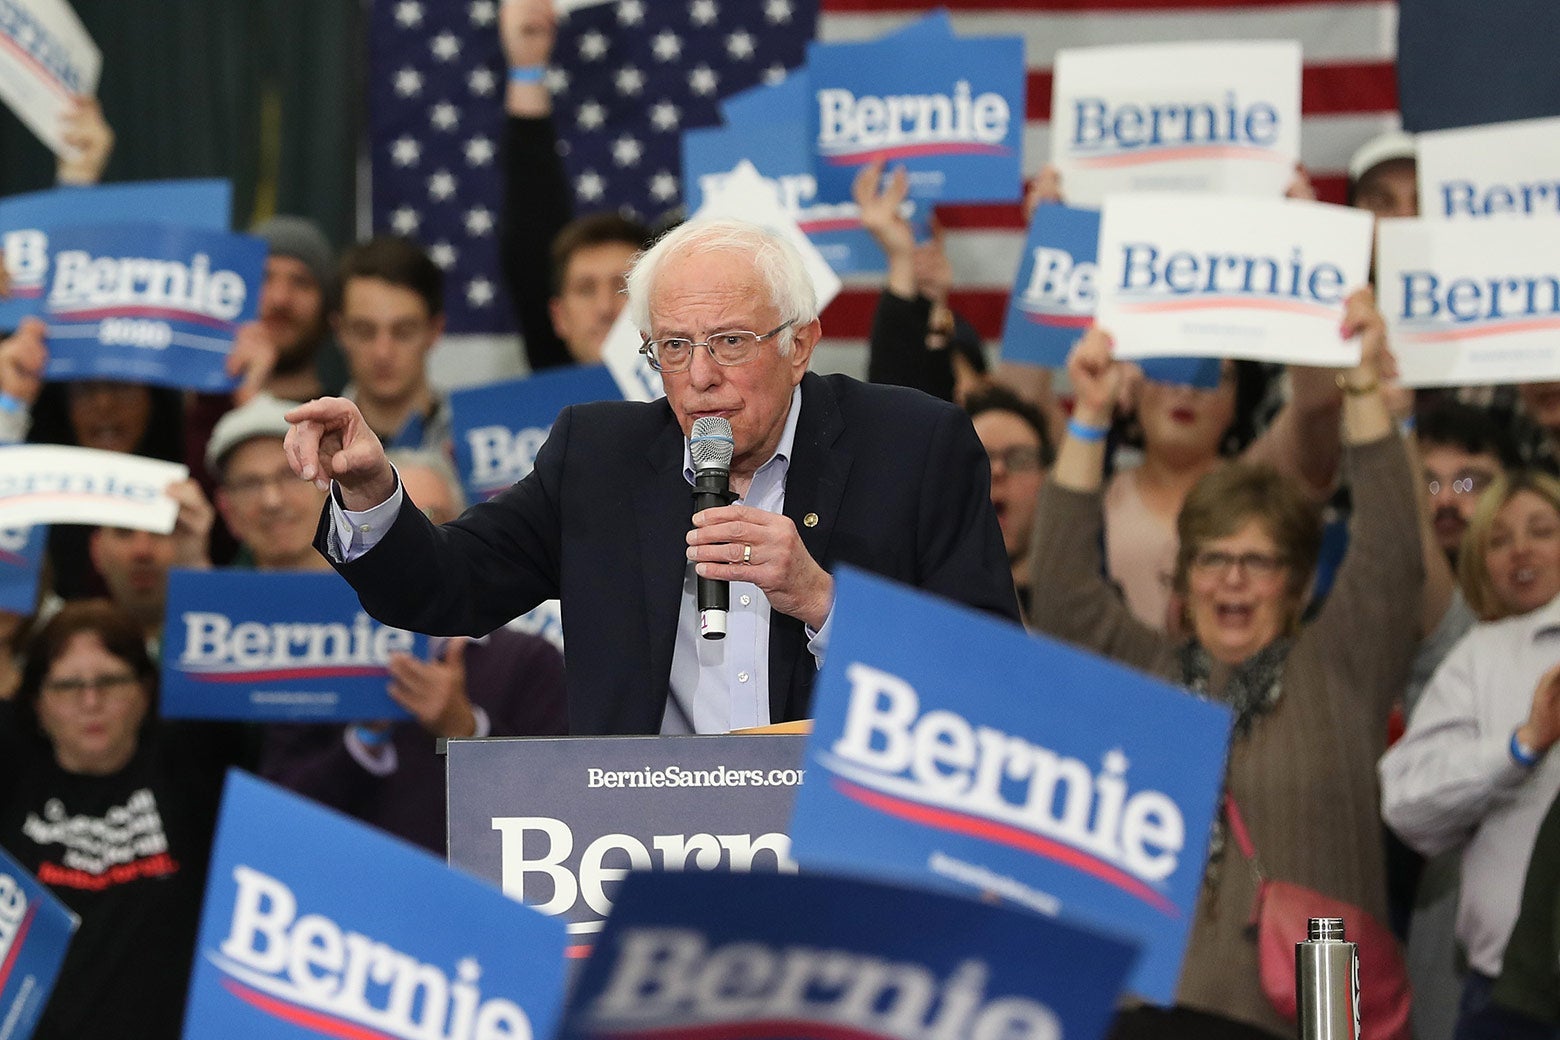 Bernie Sanders at a rally with supporters behind him holding signs that say, "Bernie."